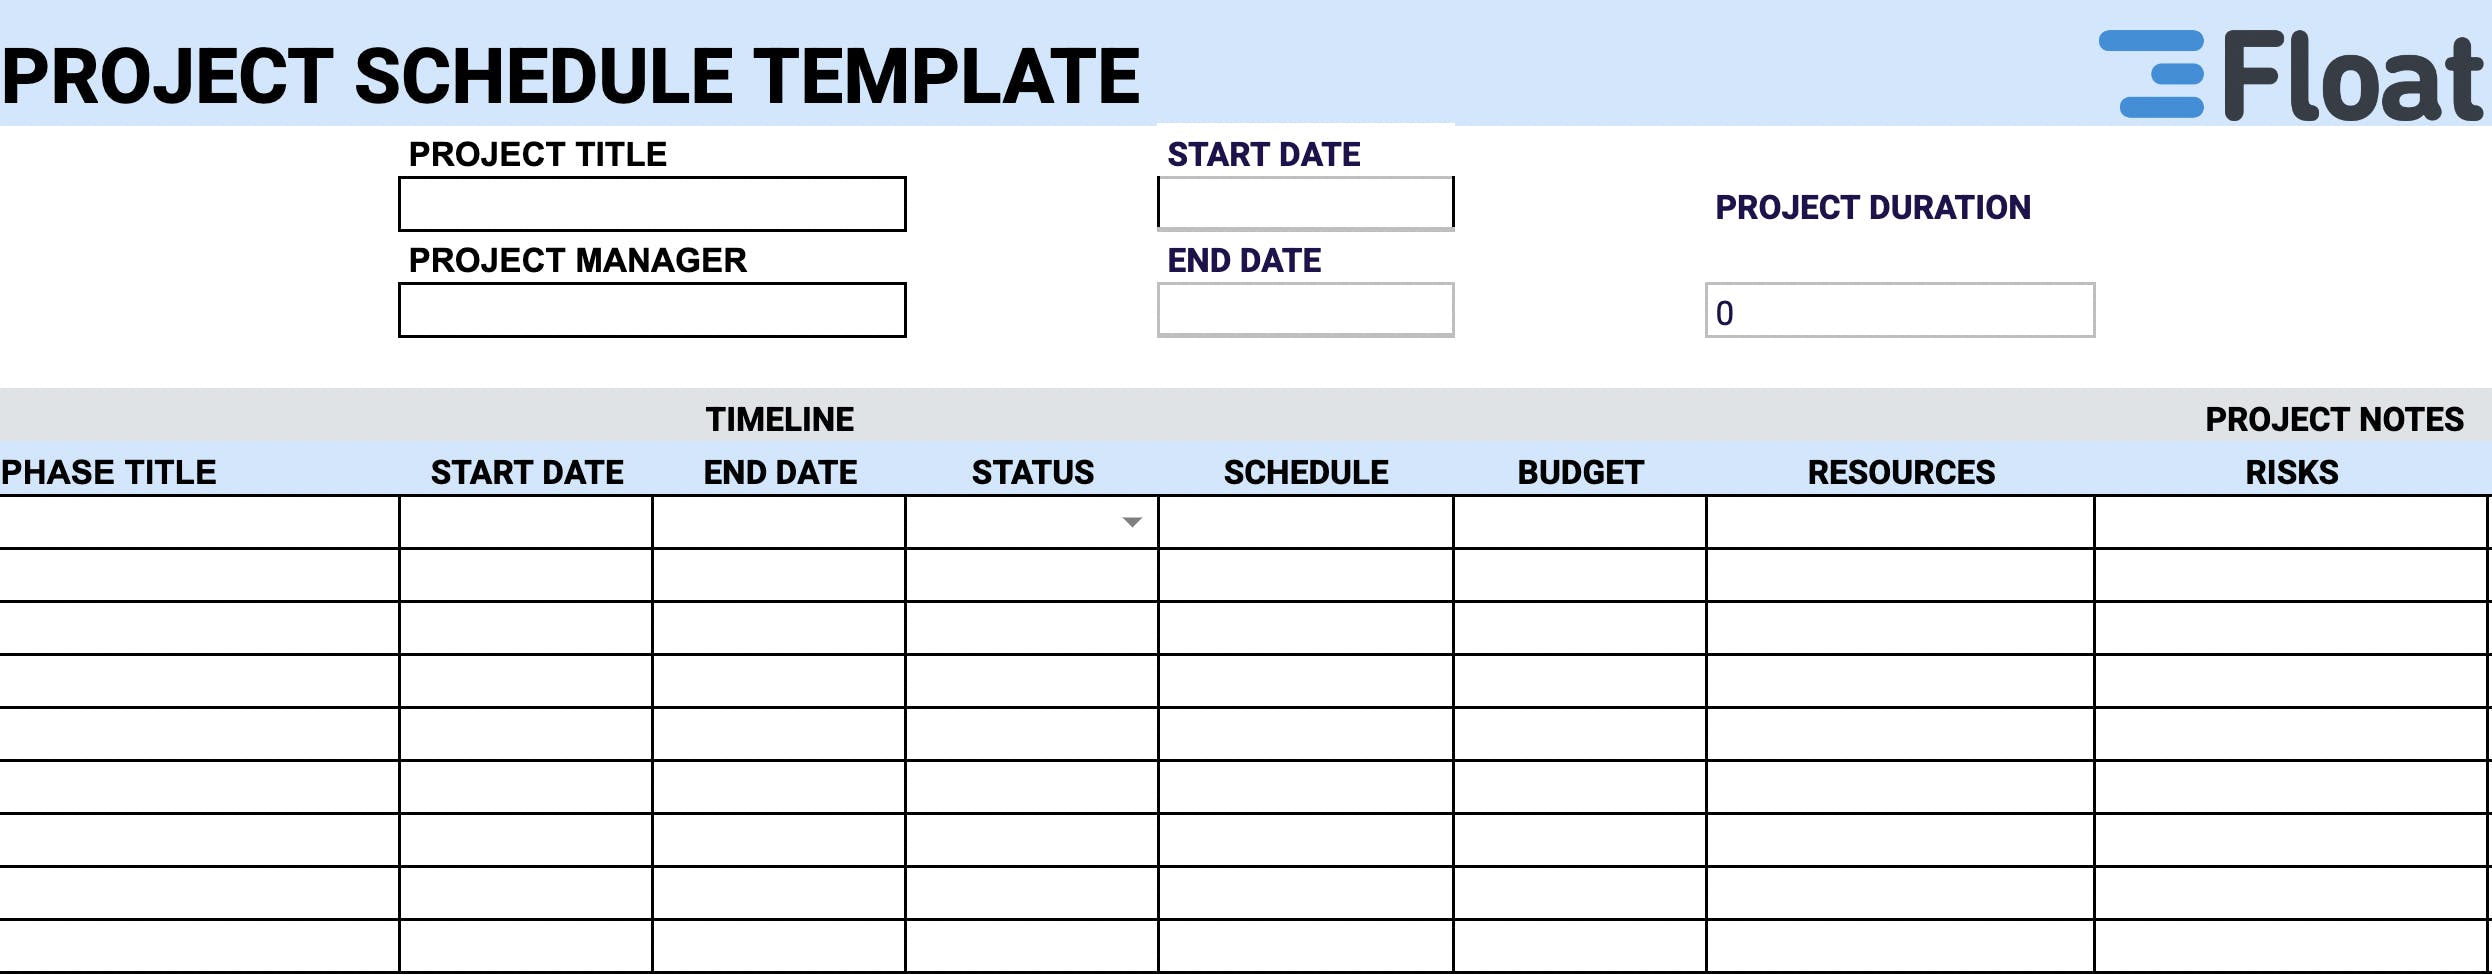 Project schedule template